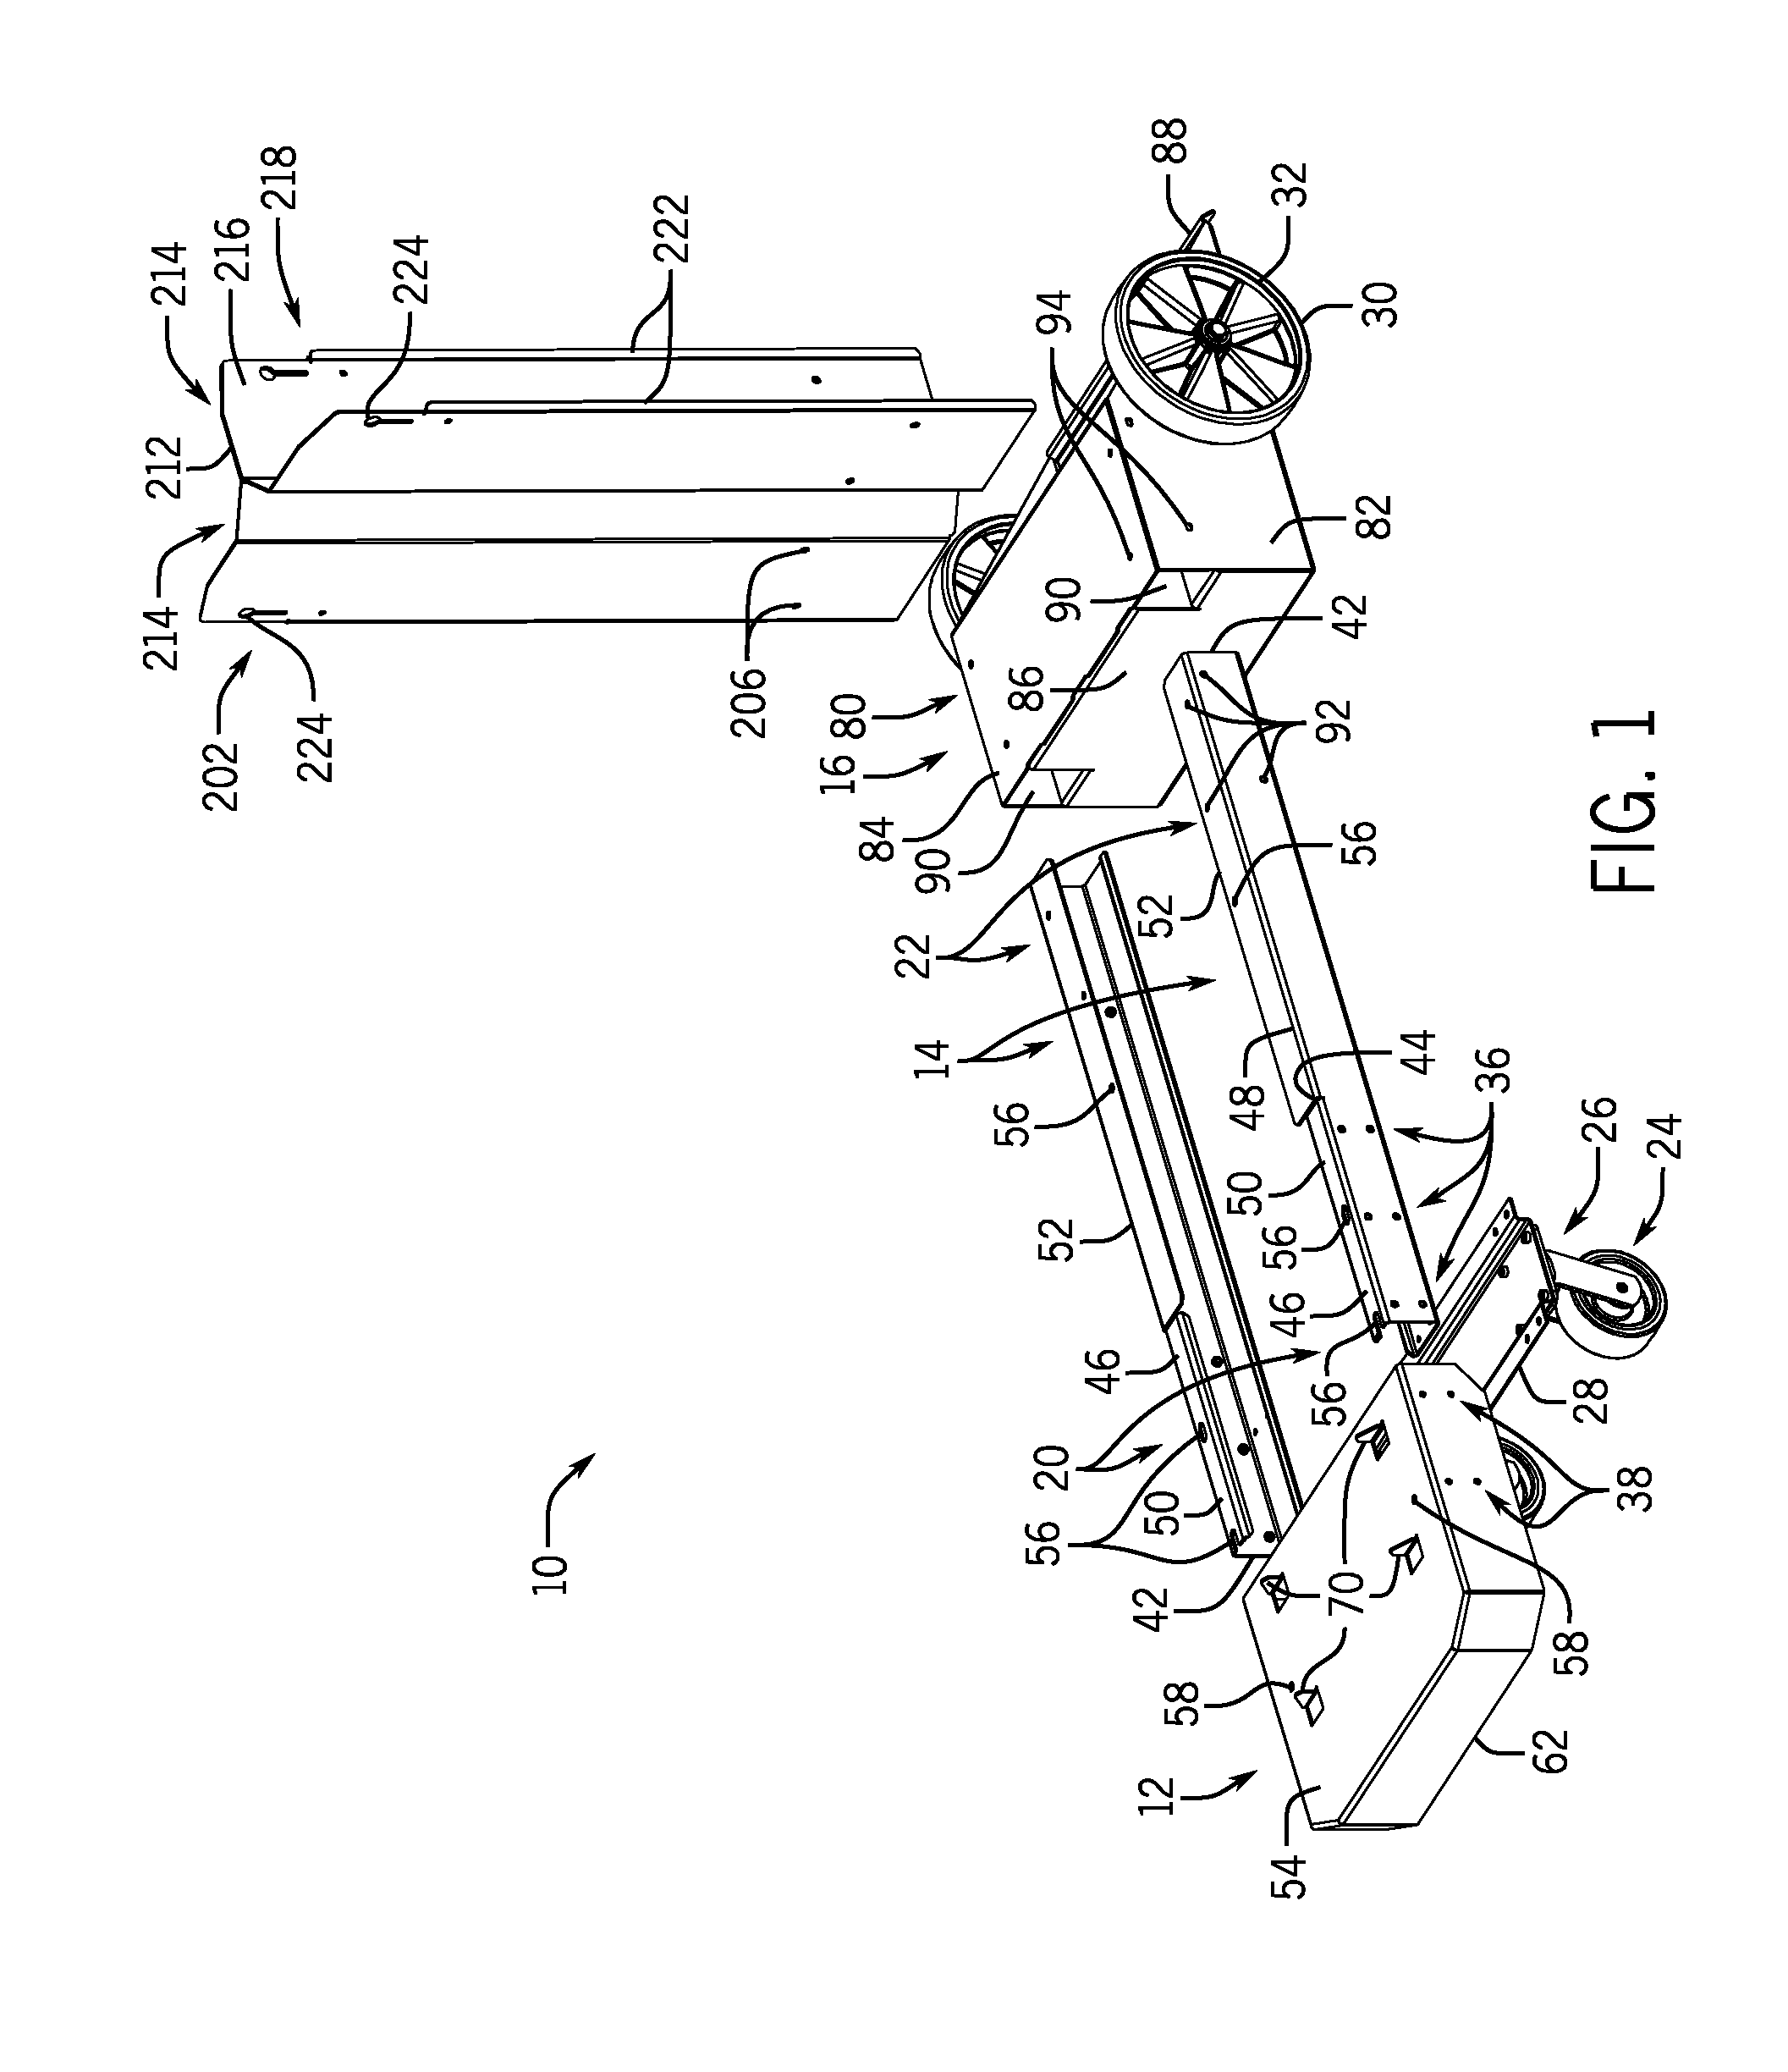 System and method for modular transportation of a welding system